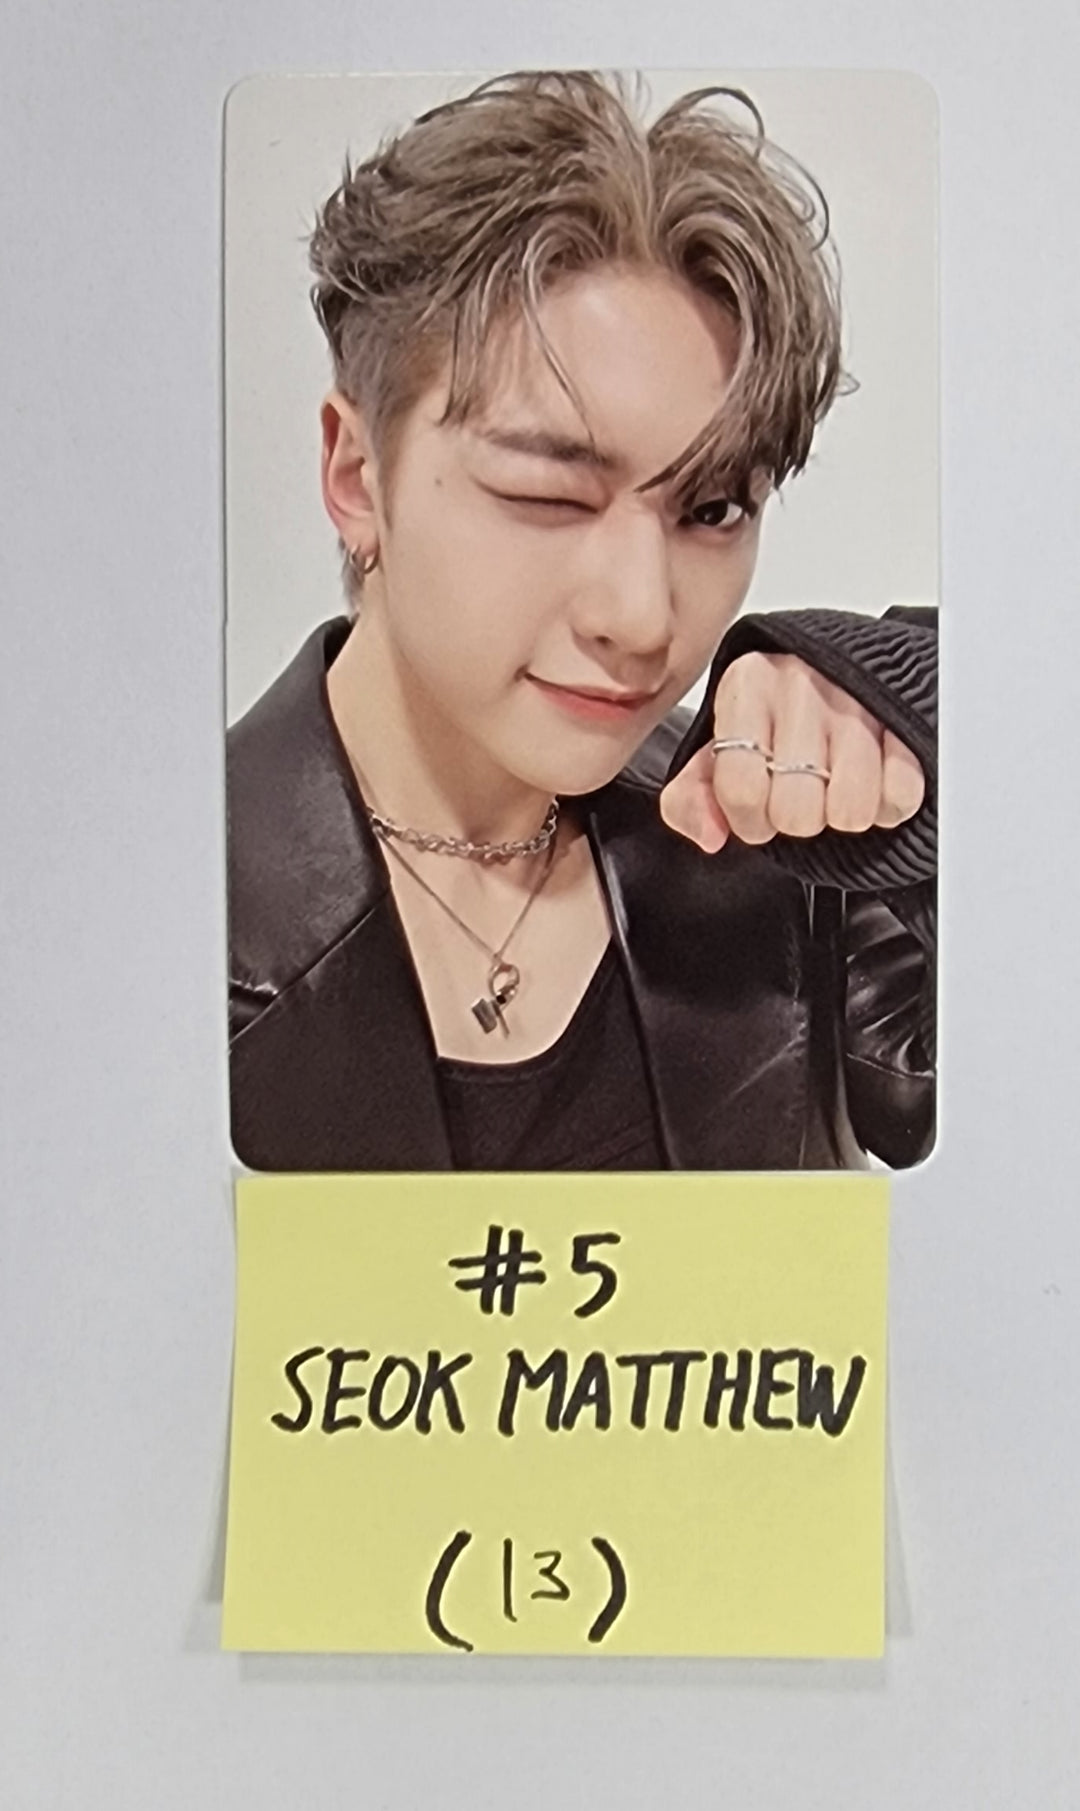 ZEROBASEONE (ZB1) "MELTING POINT" - Official Photocard (1) [23.11.07]